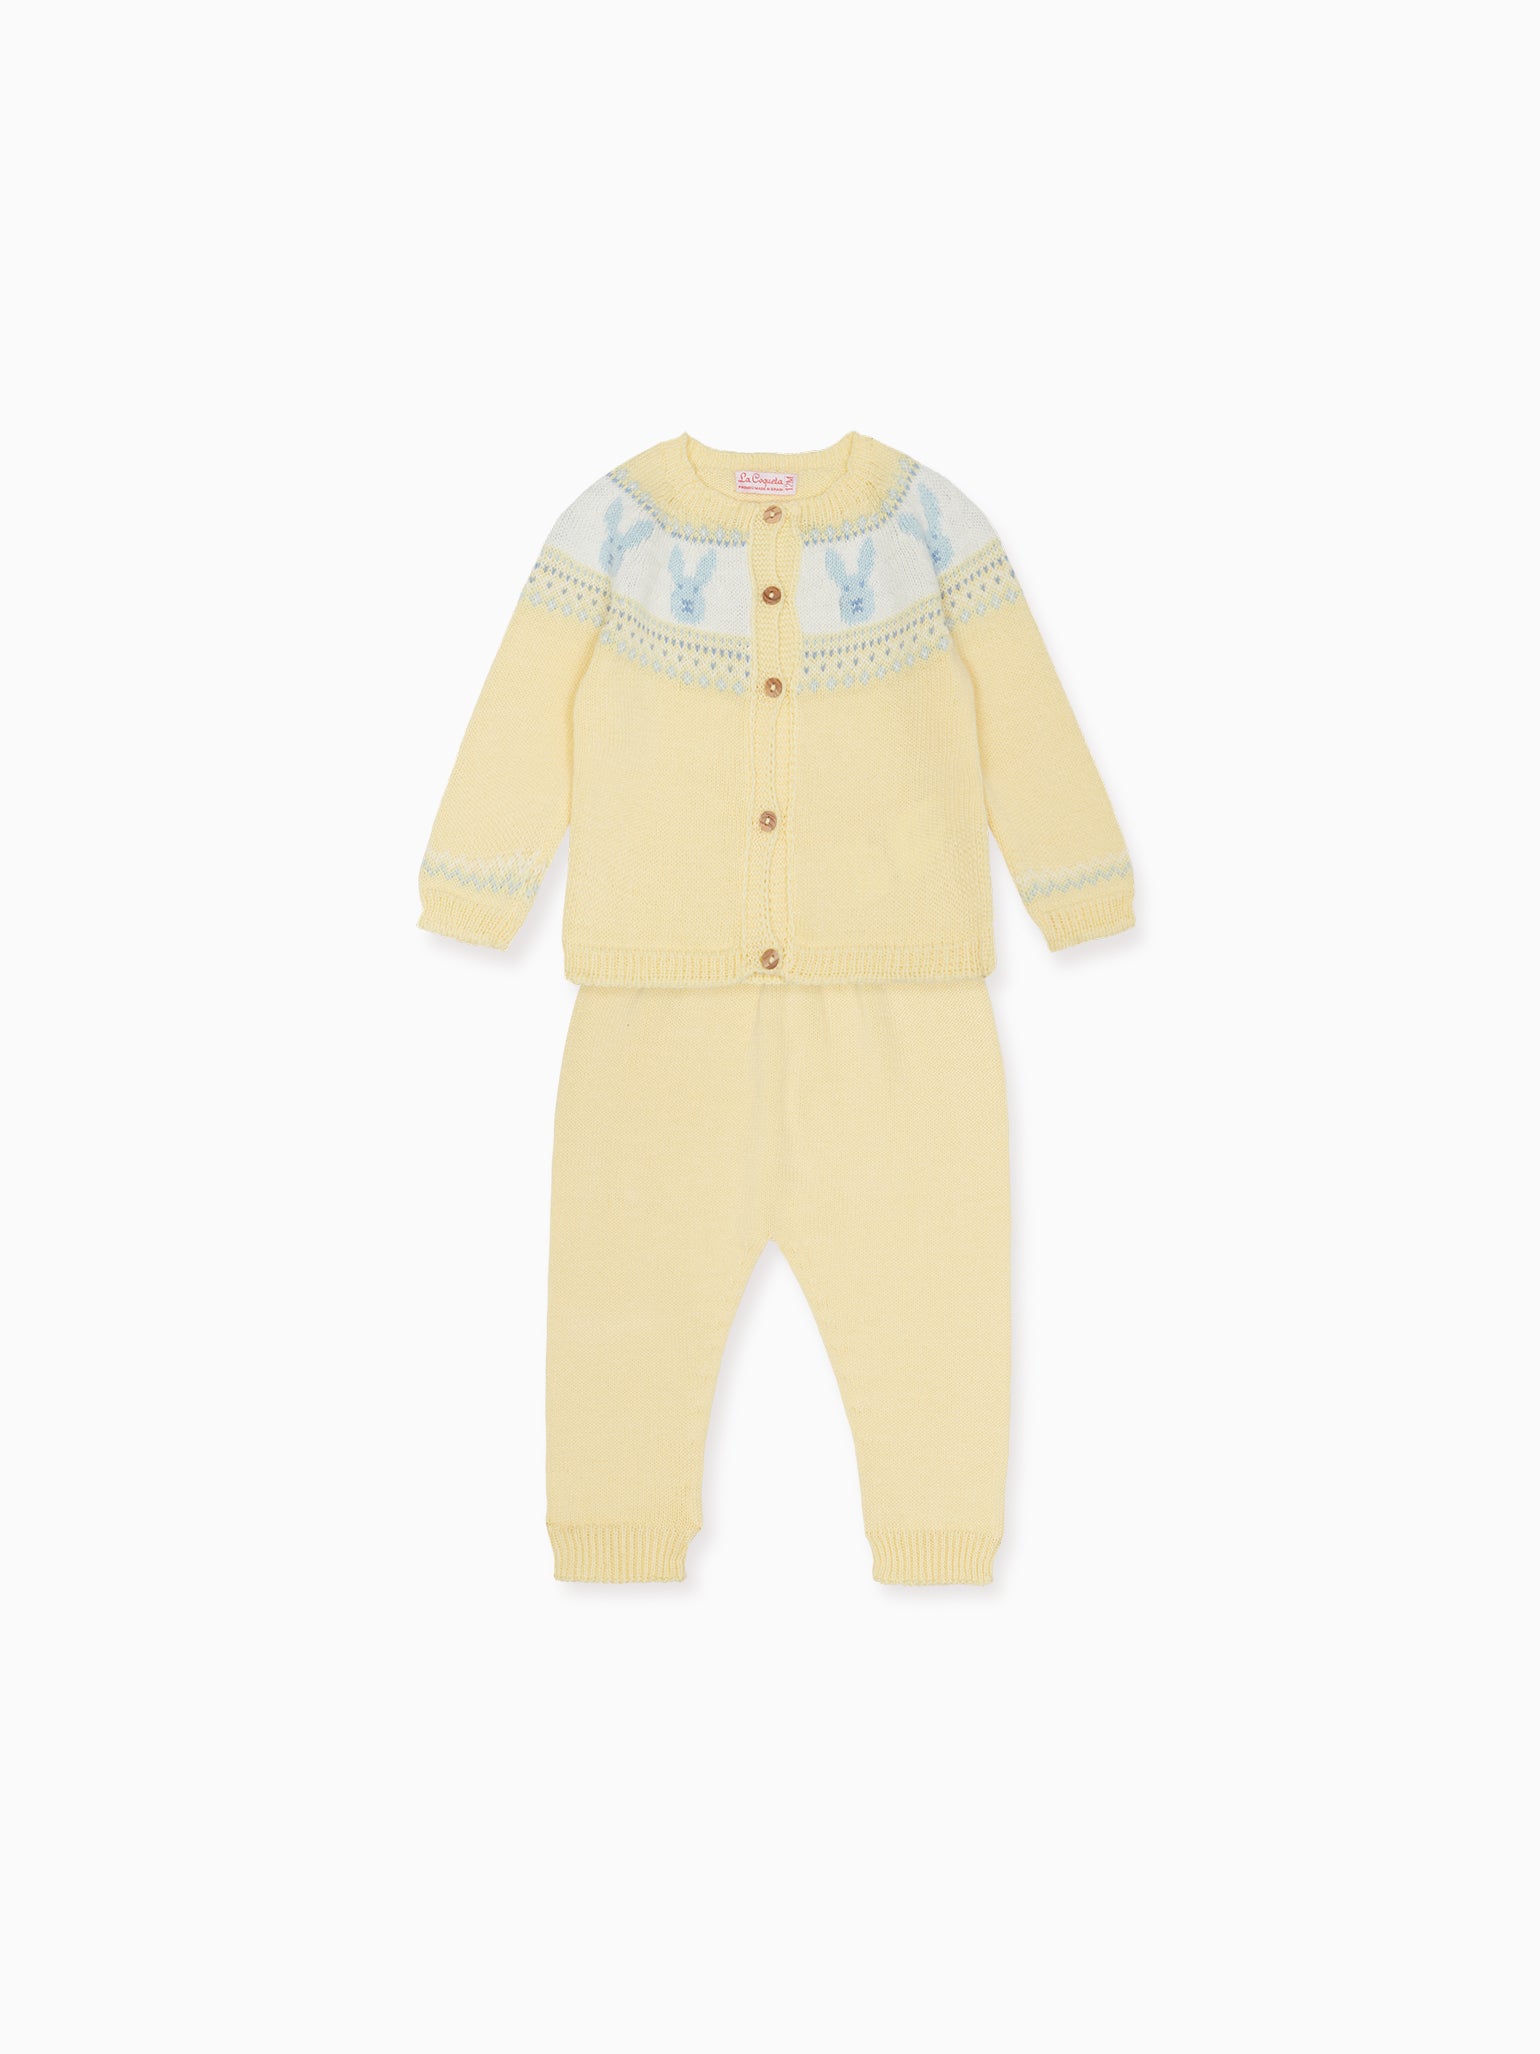 Adorable Baby Boy Dress and Kids Suiting on Sale